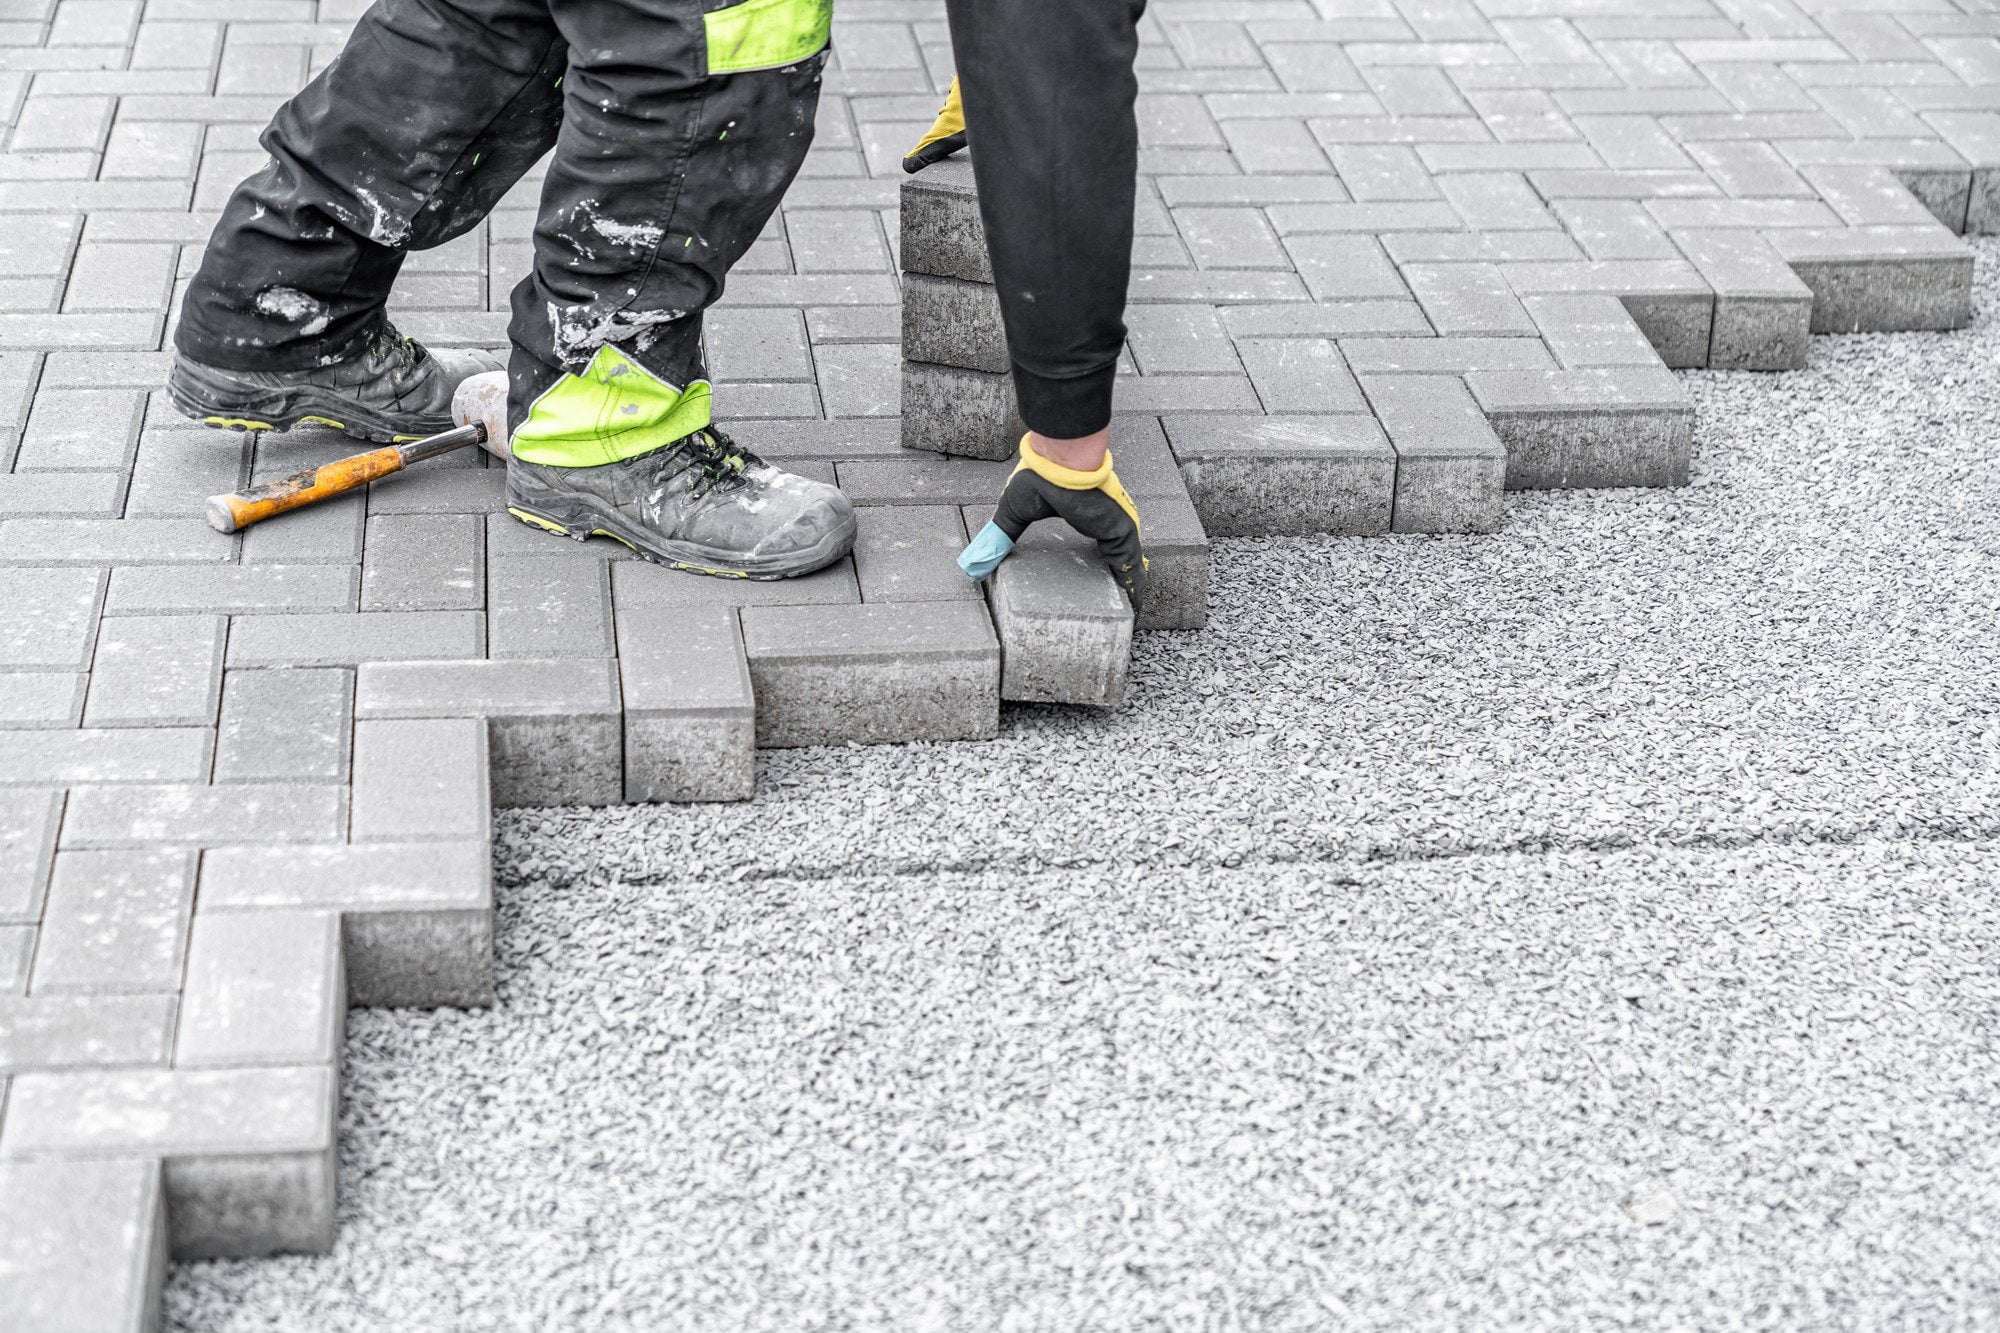 This image shows a person laying interlocking paving stones on a gravel base. The person is wearing work gear, including protective boots, a high visibility strip on the pants, and gloves. A rubber mallet, which is used to tap the pavers into place, is on the ground near one of the worker's feet. The area that has yet to be paved is covered with gravel, while a portion of the surface has already been neatly laid with grey paving stones. The precise manner in which the stones are being laid suggests a methodical and professional approach to paving.